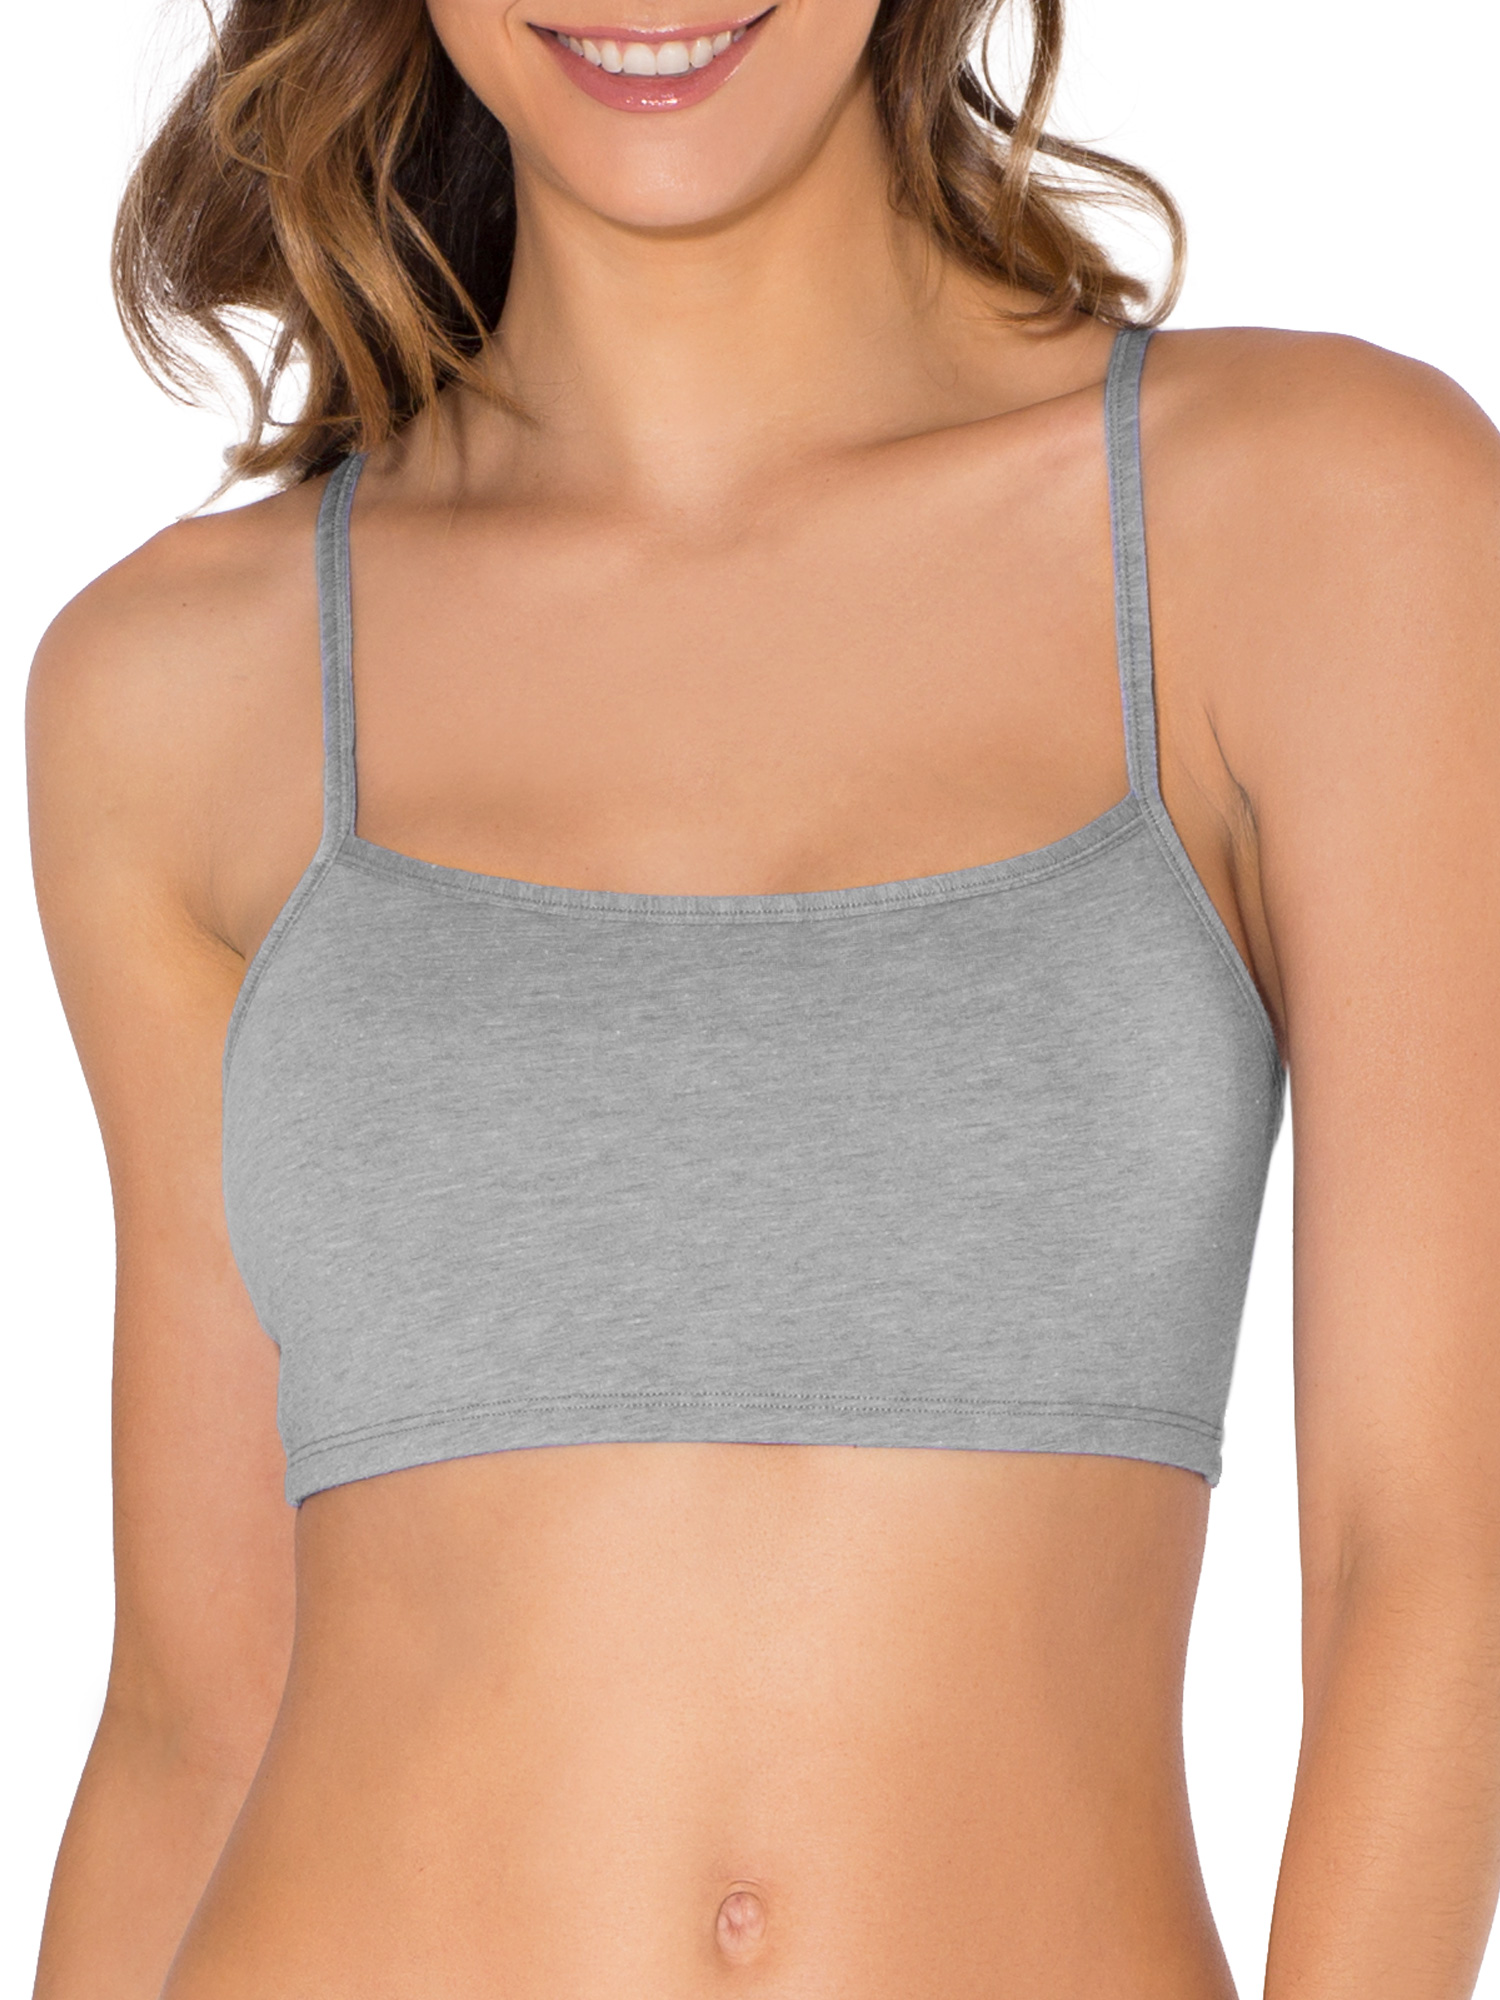 Fruit of the Loom Women's Spaghetti Strap Cotton Sports Bra, 3-Pack, Style-9036 - image 5 of 9